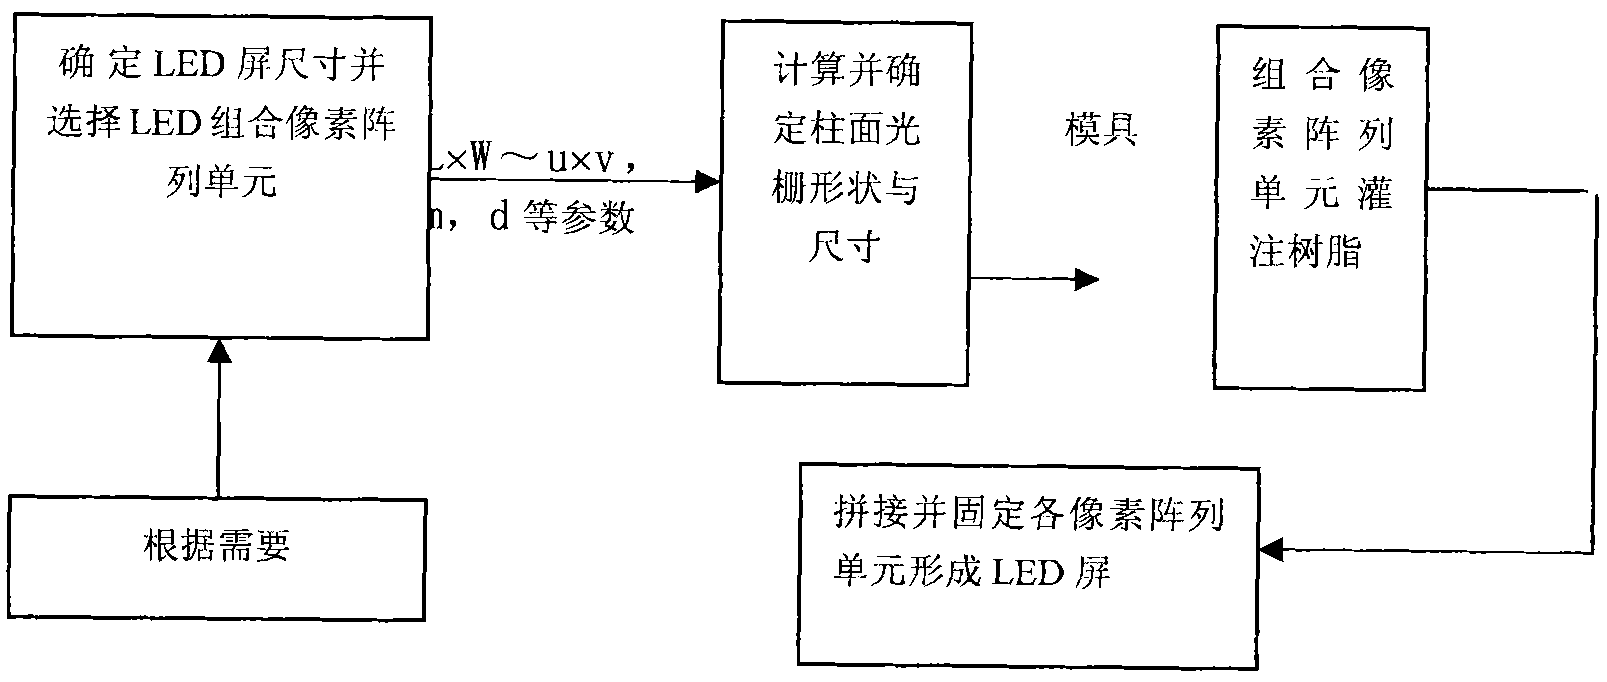 Manufacturing method of large LED (light emitting diode) screen of 3D (three dimensional) television